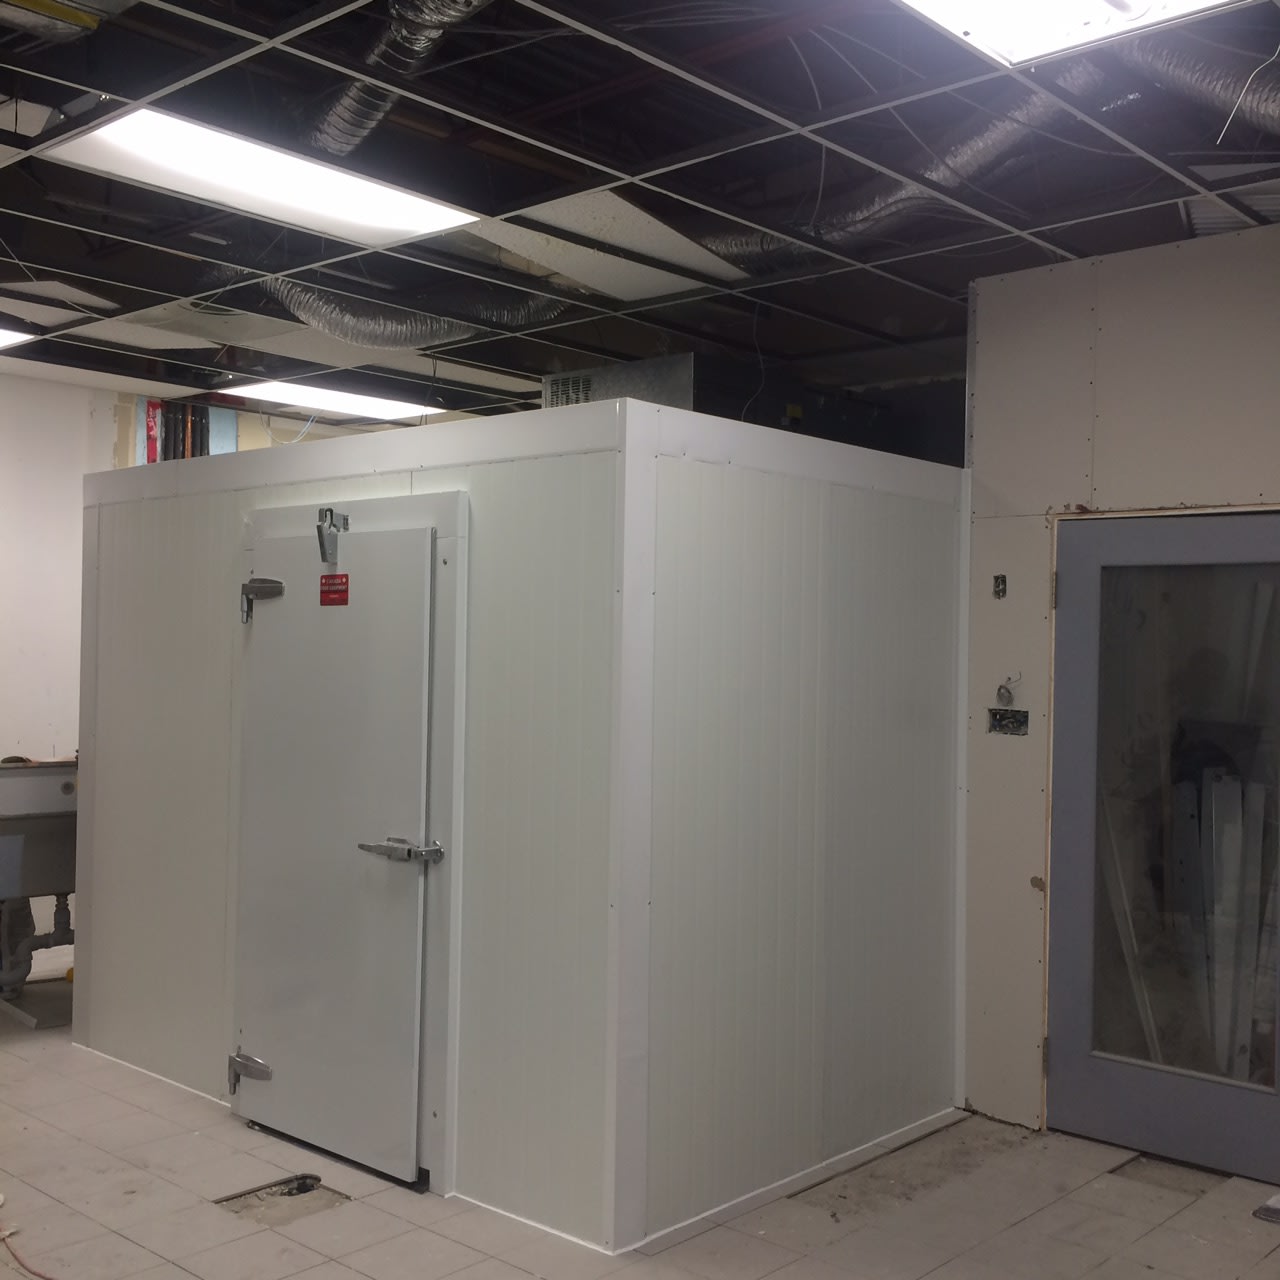 8x10x8H Walk-In Cooler - Self Contained (NEW) - C8108NSC